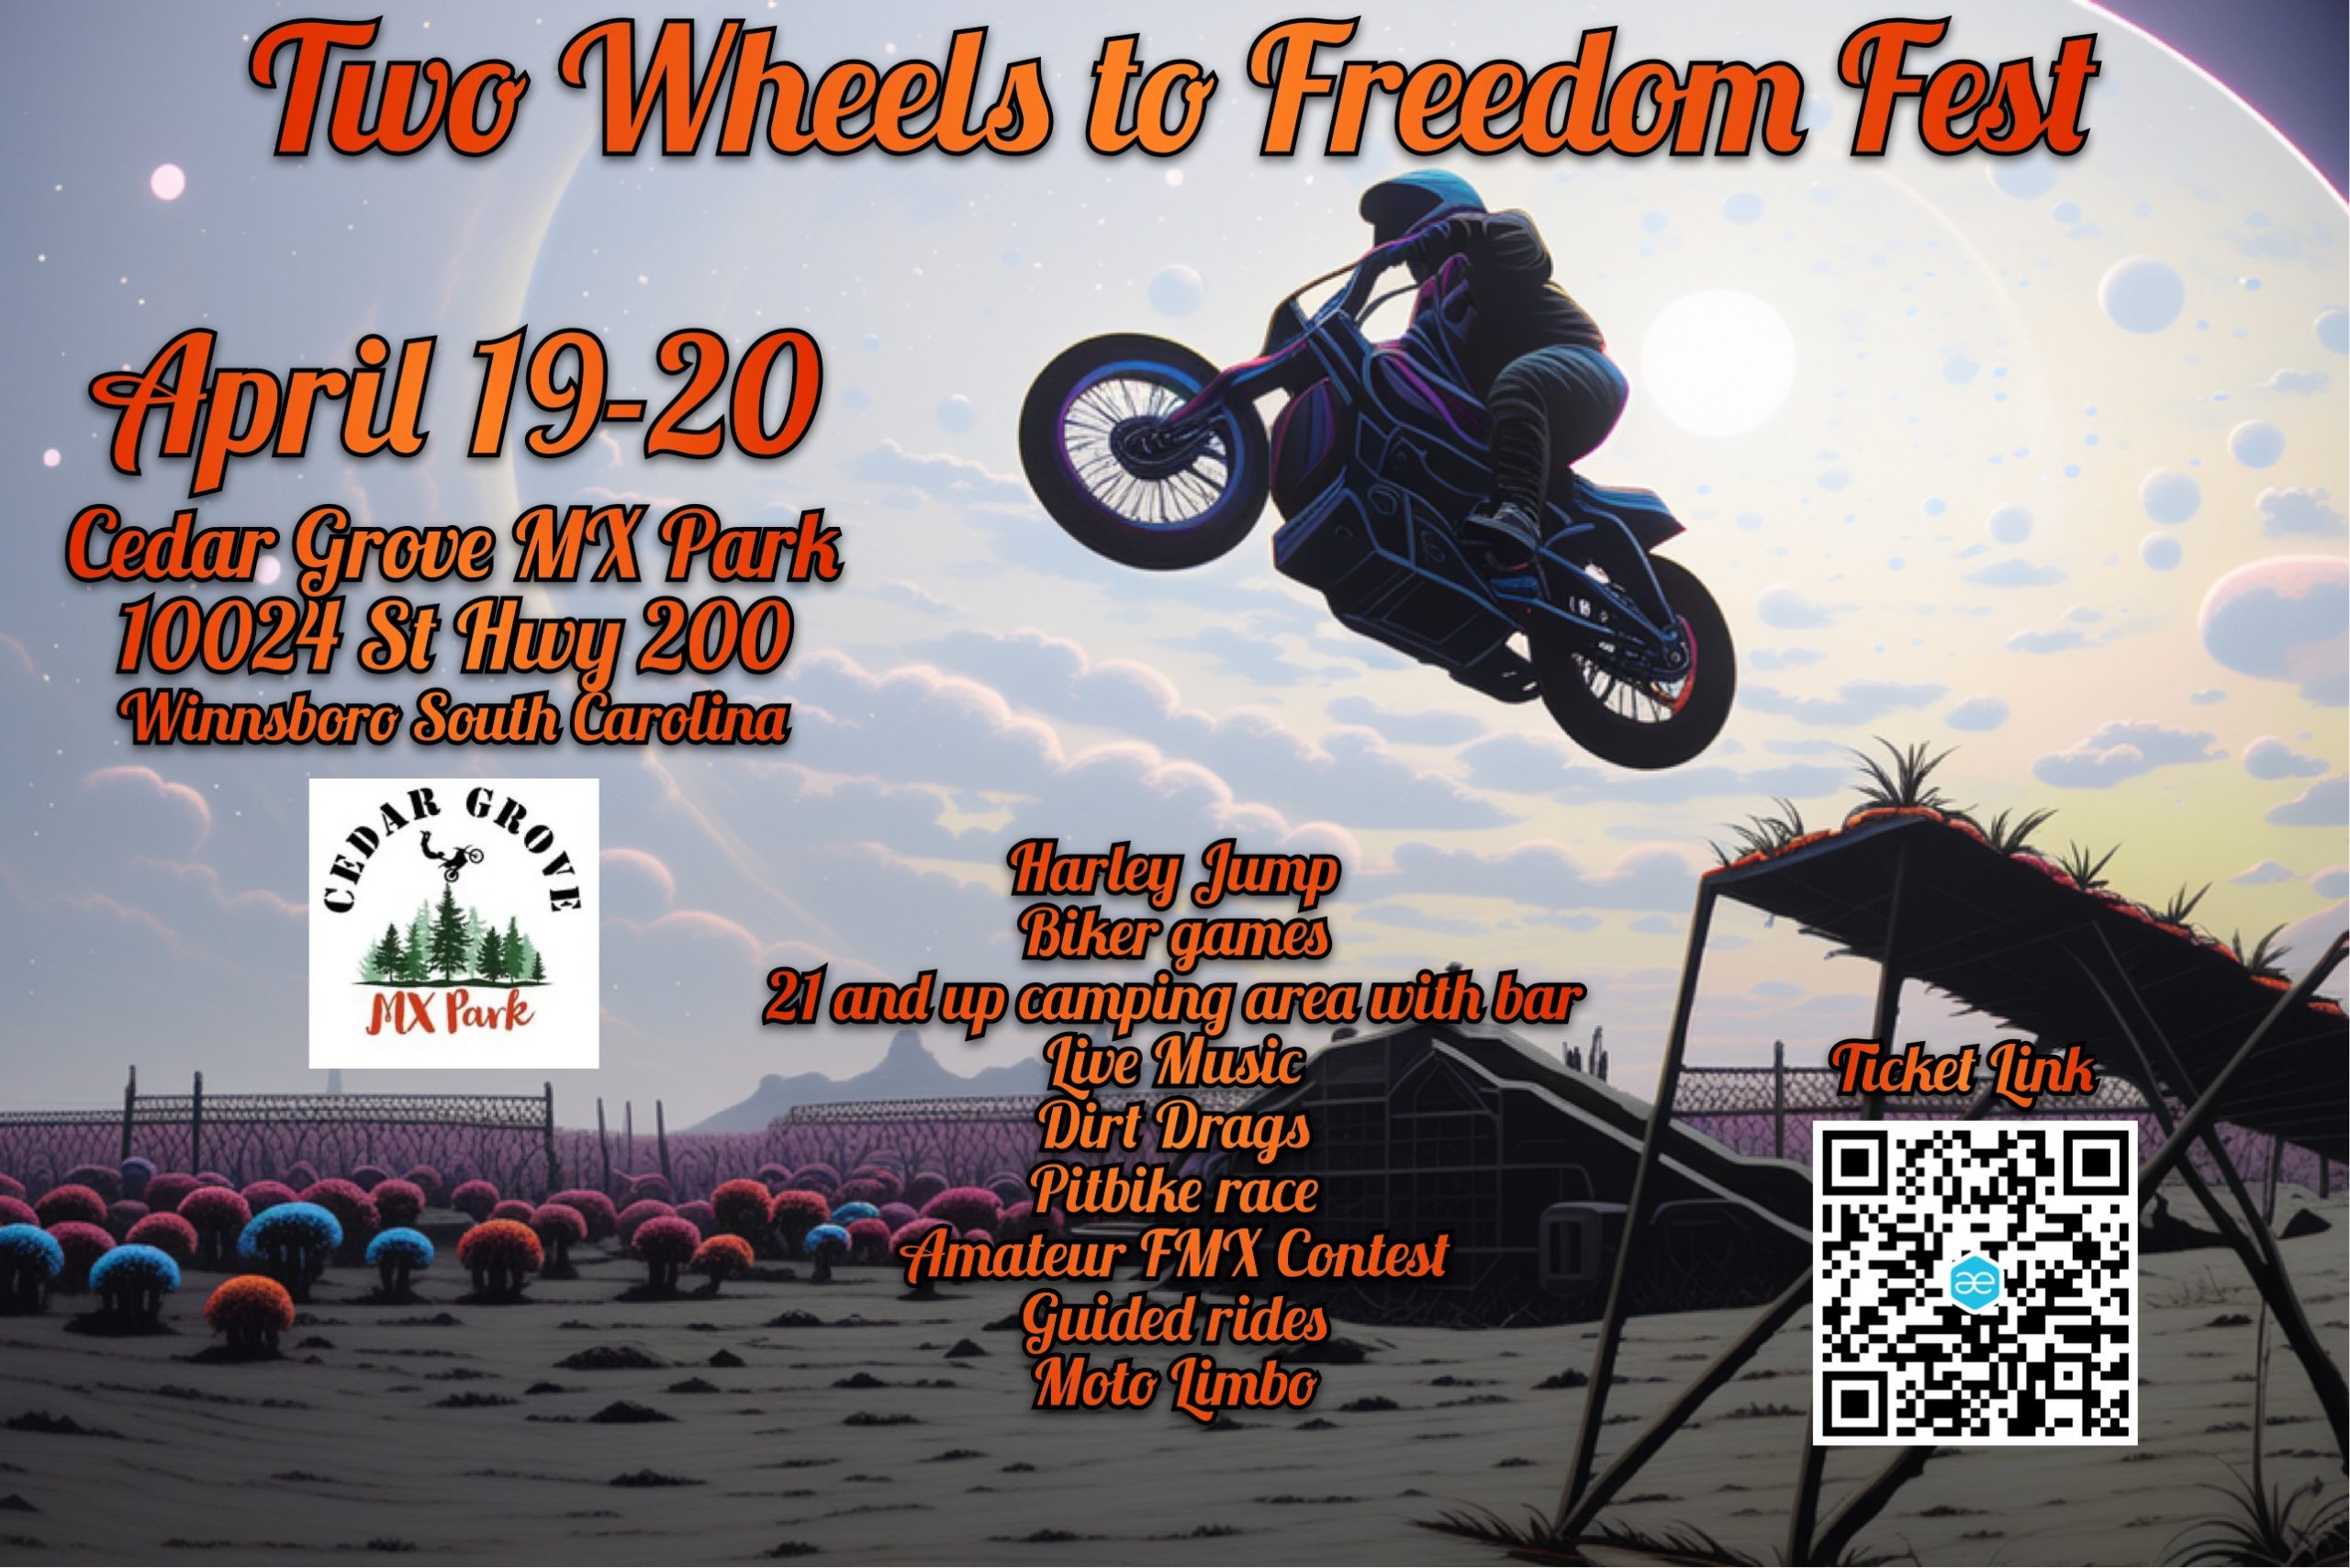 Two Wheels to Freedom Fest